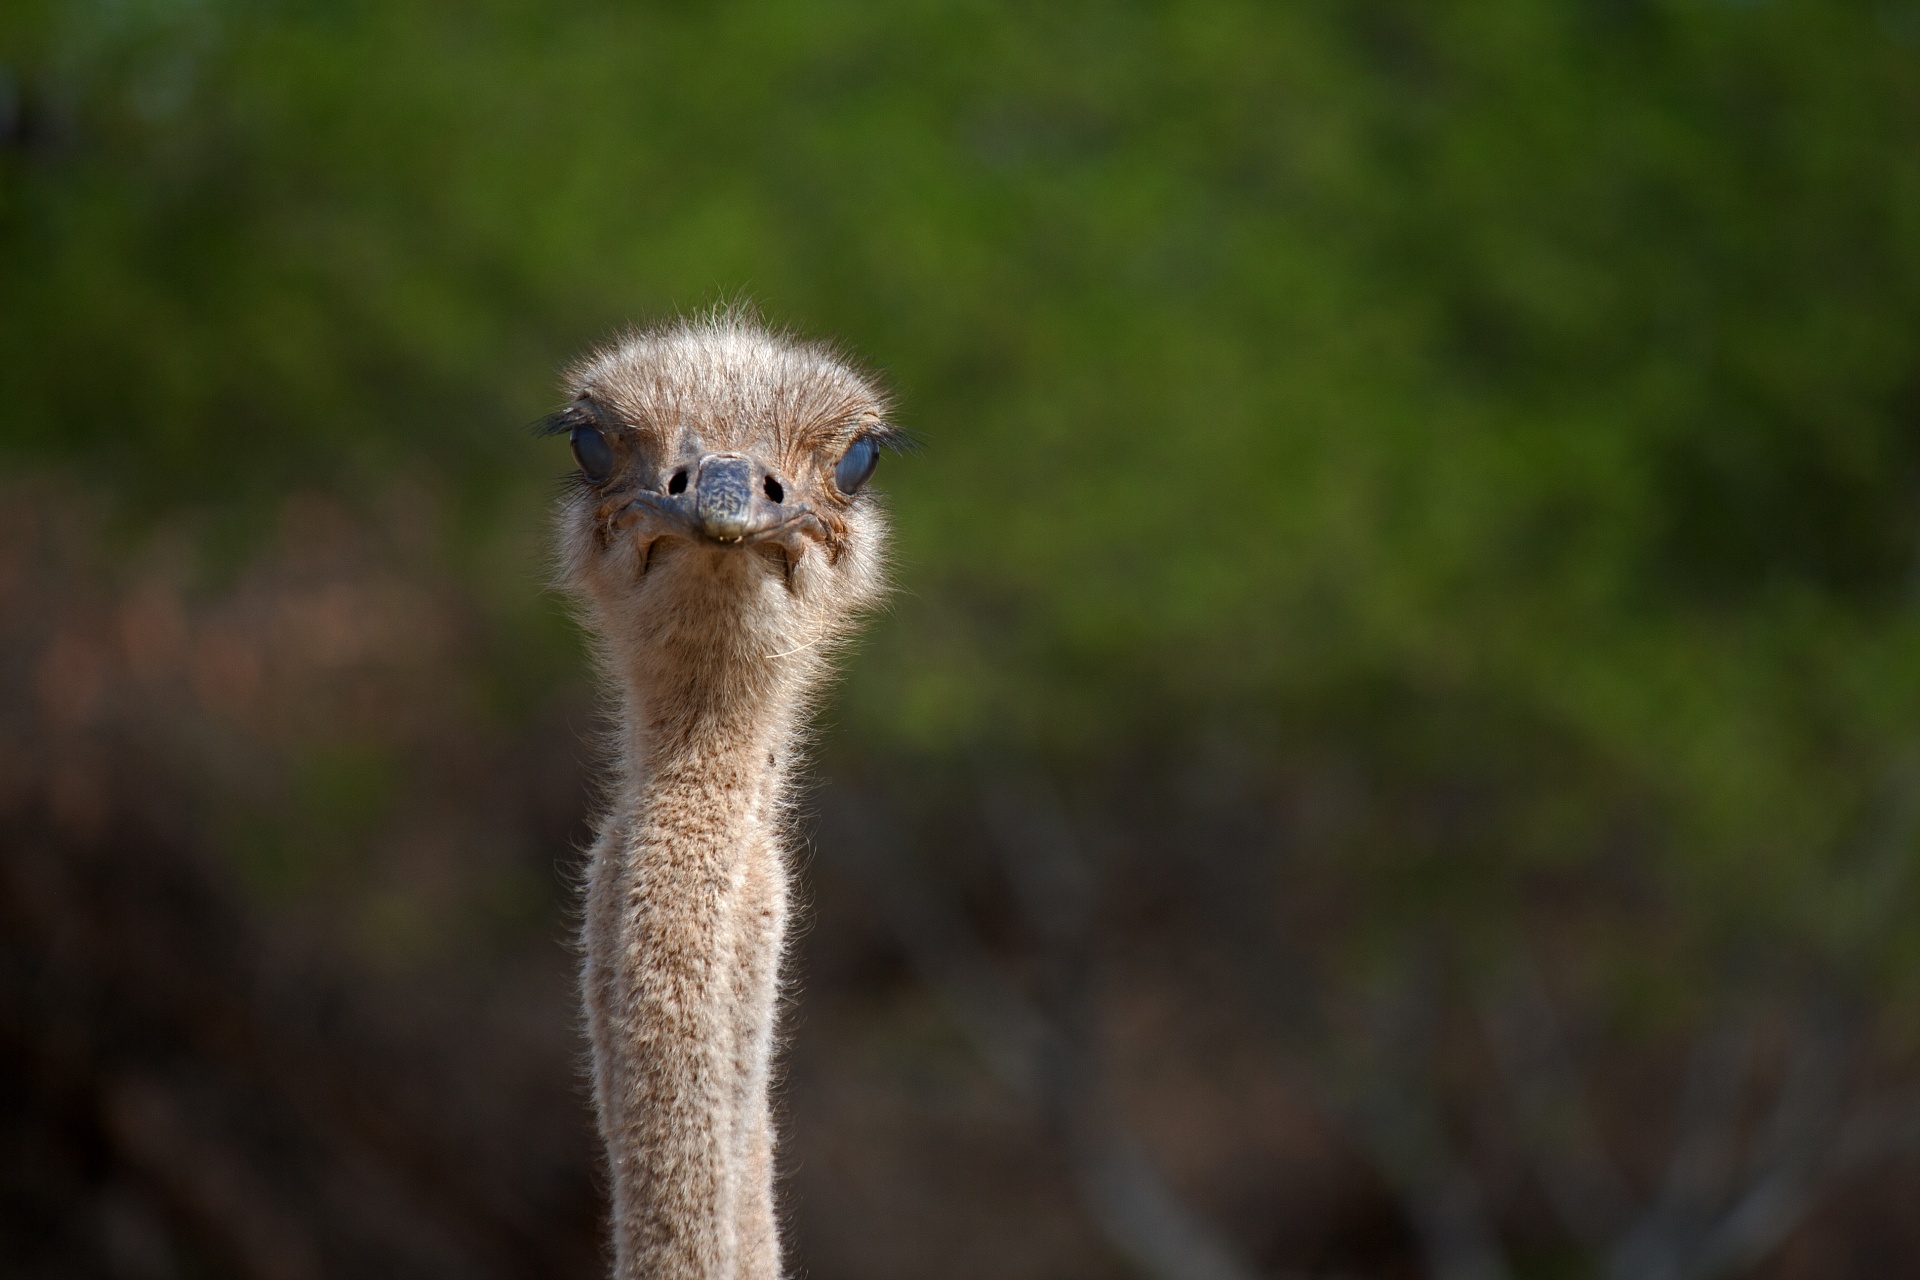 Face & Long Neck Of Female Ostrich